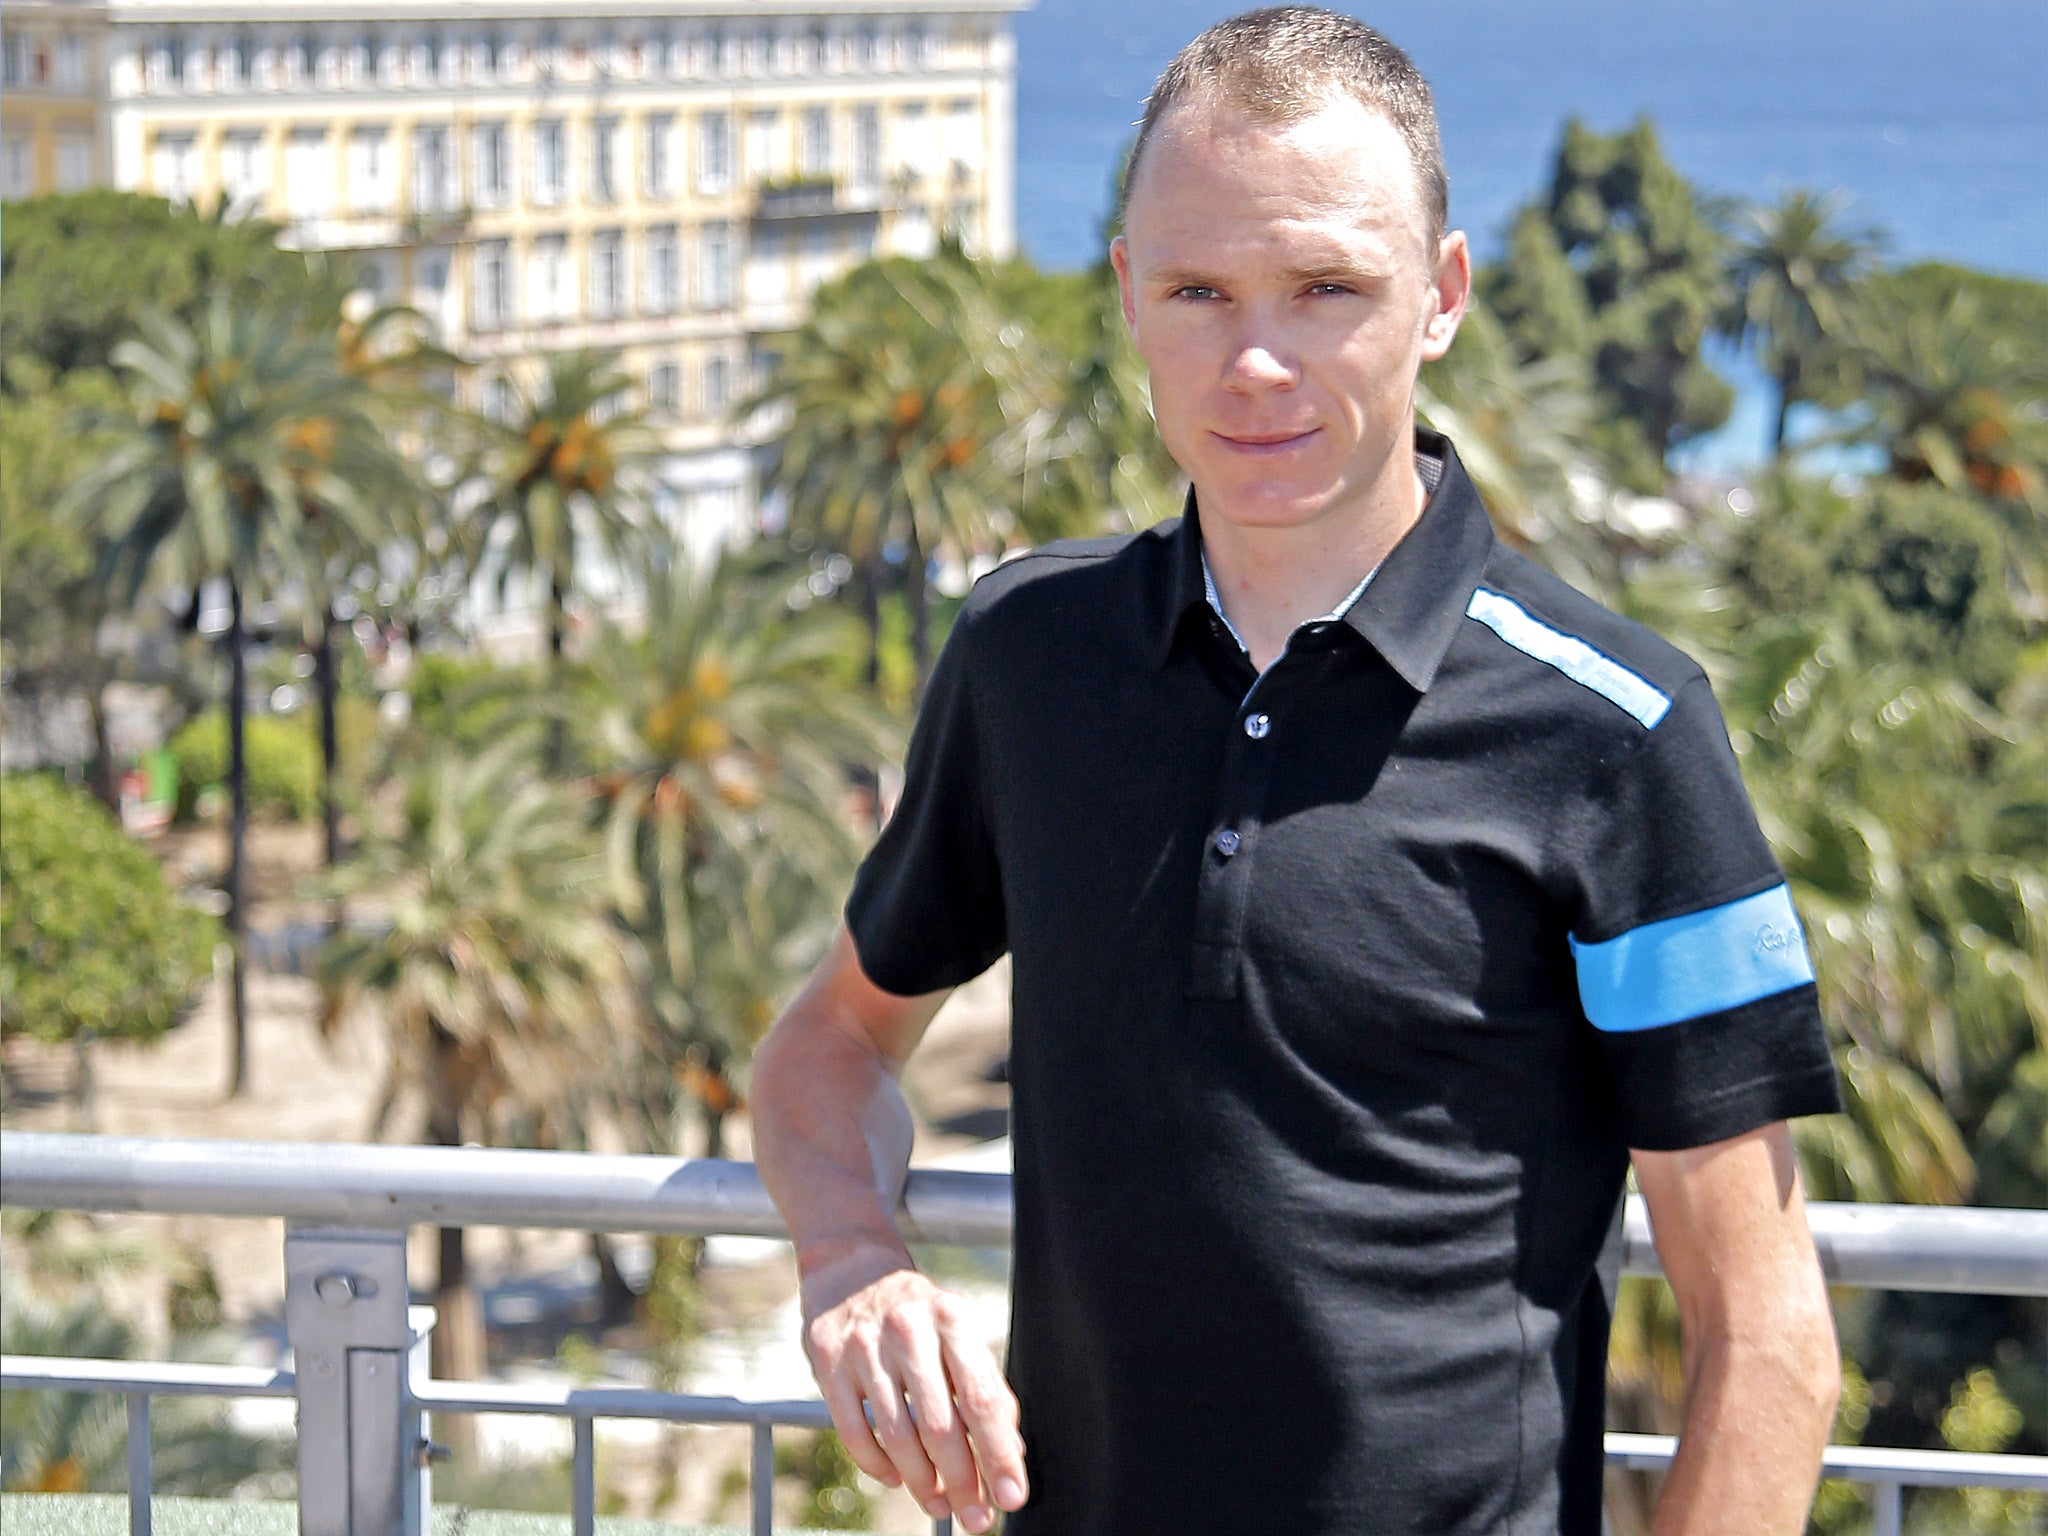 Chris Froome poses for photographers in Nice yesterday